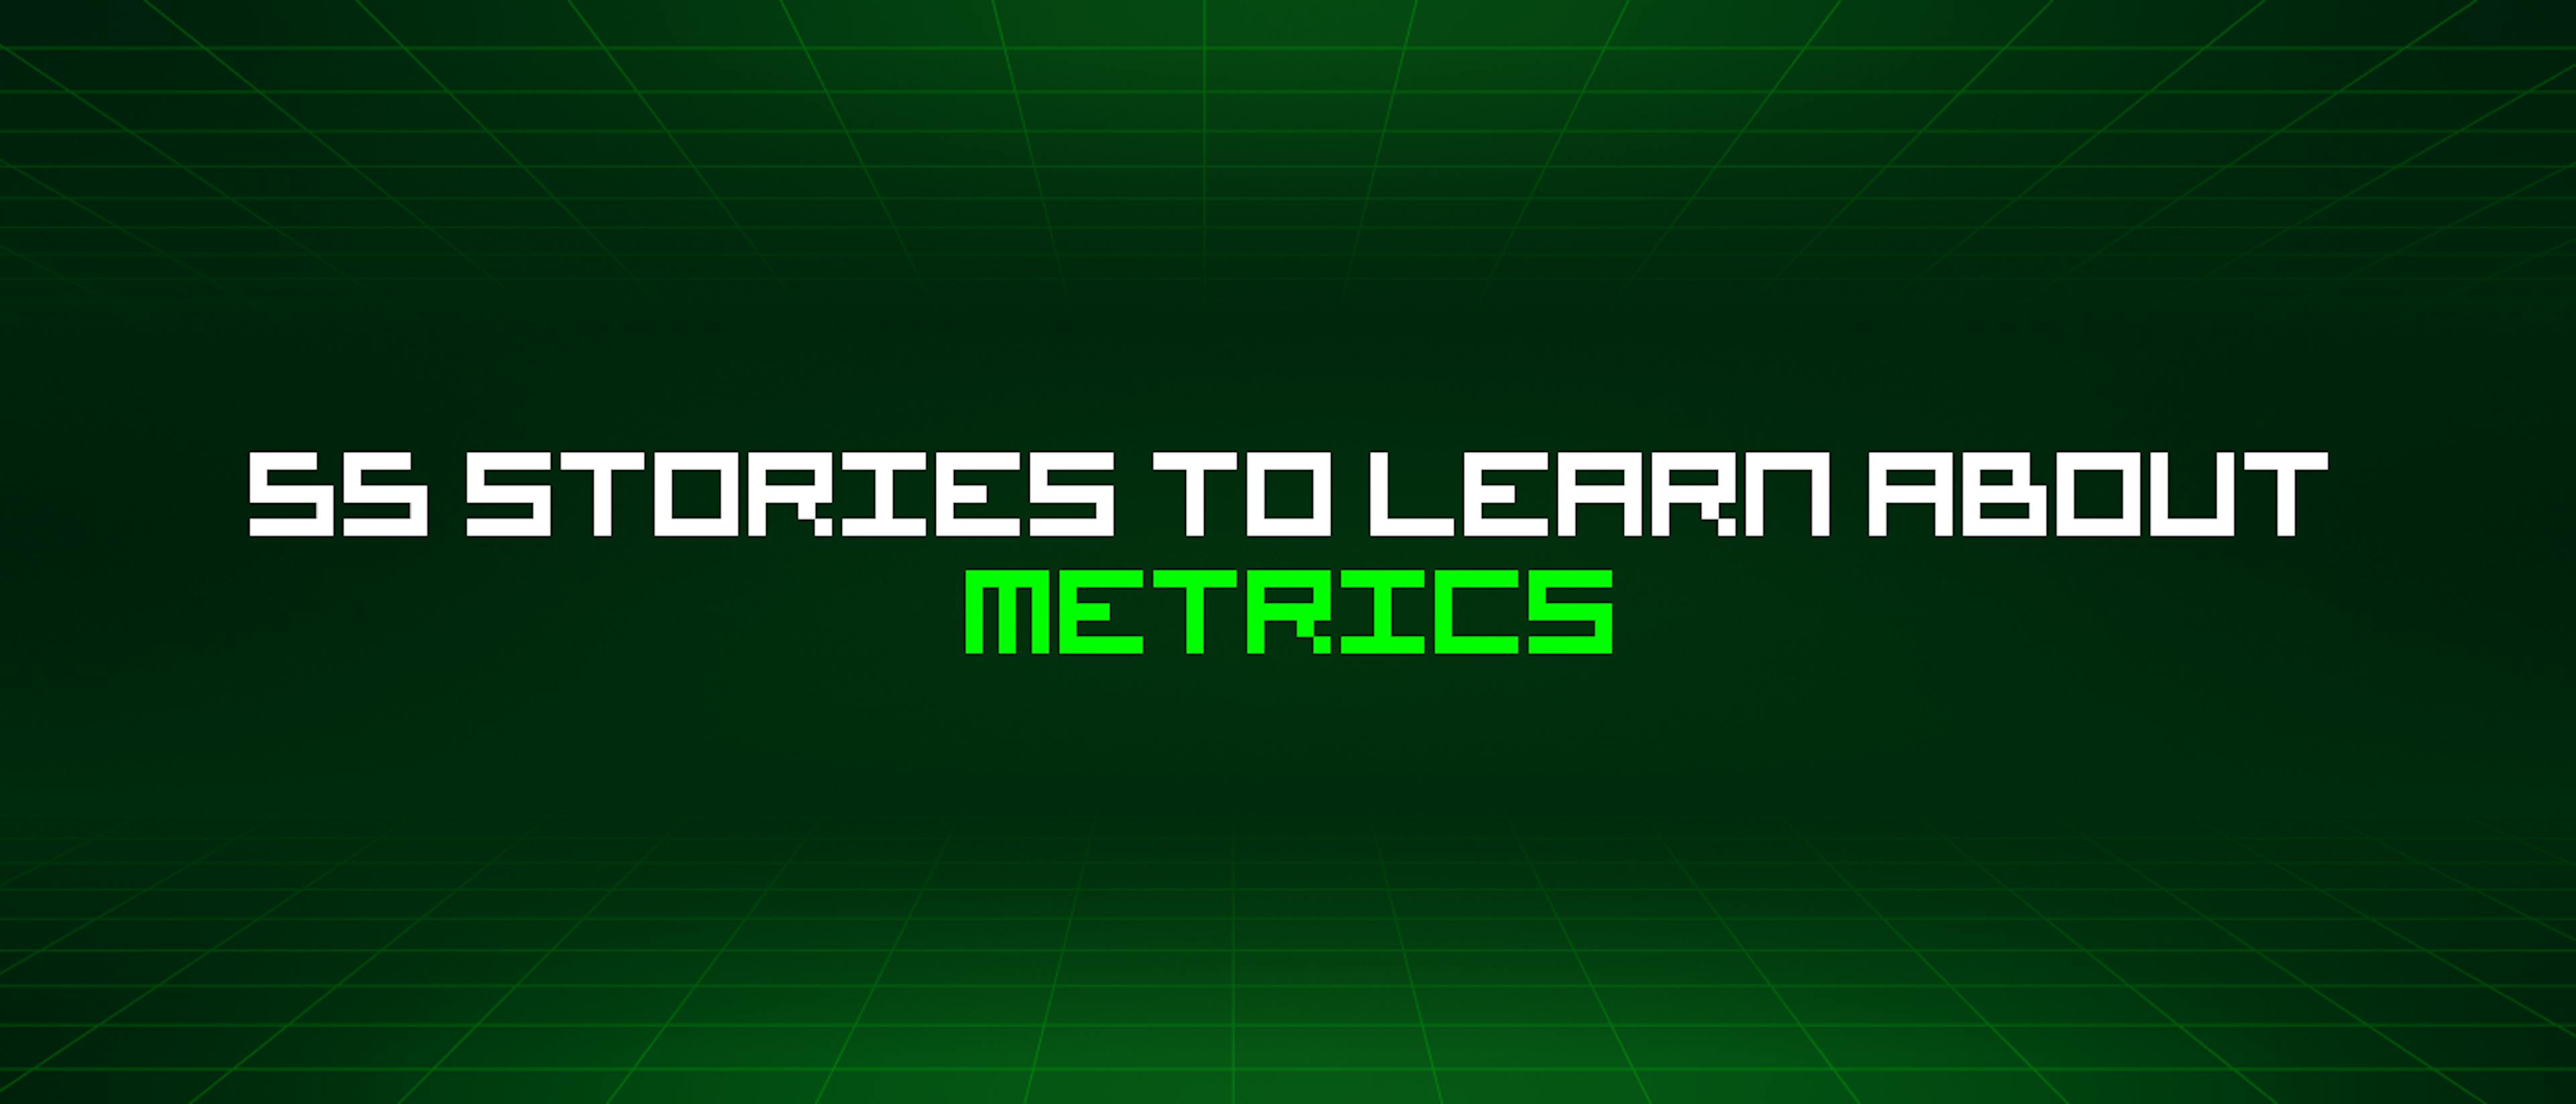 featured image - 55 Stories To Learn About Metrics